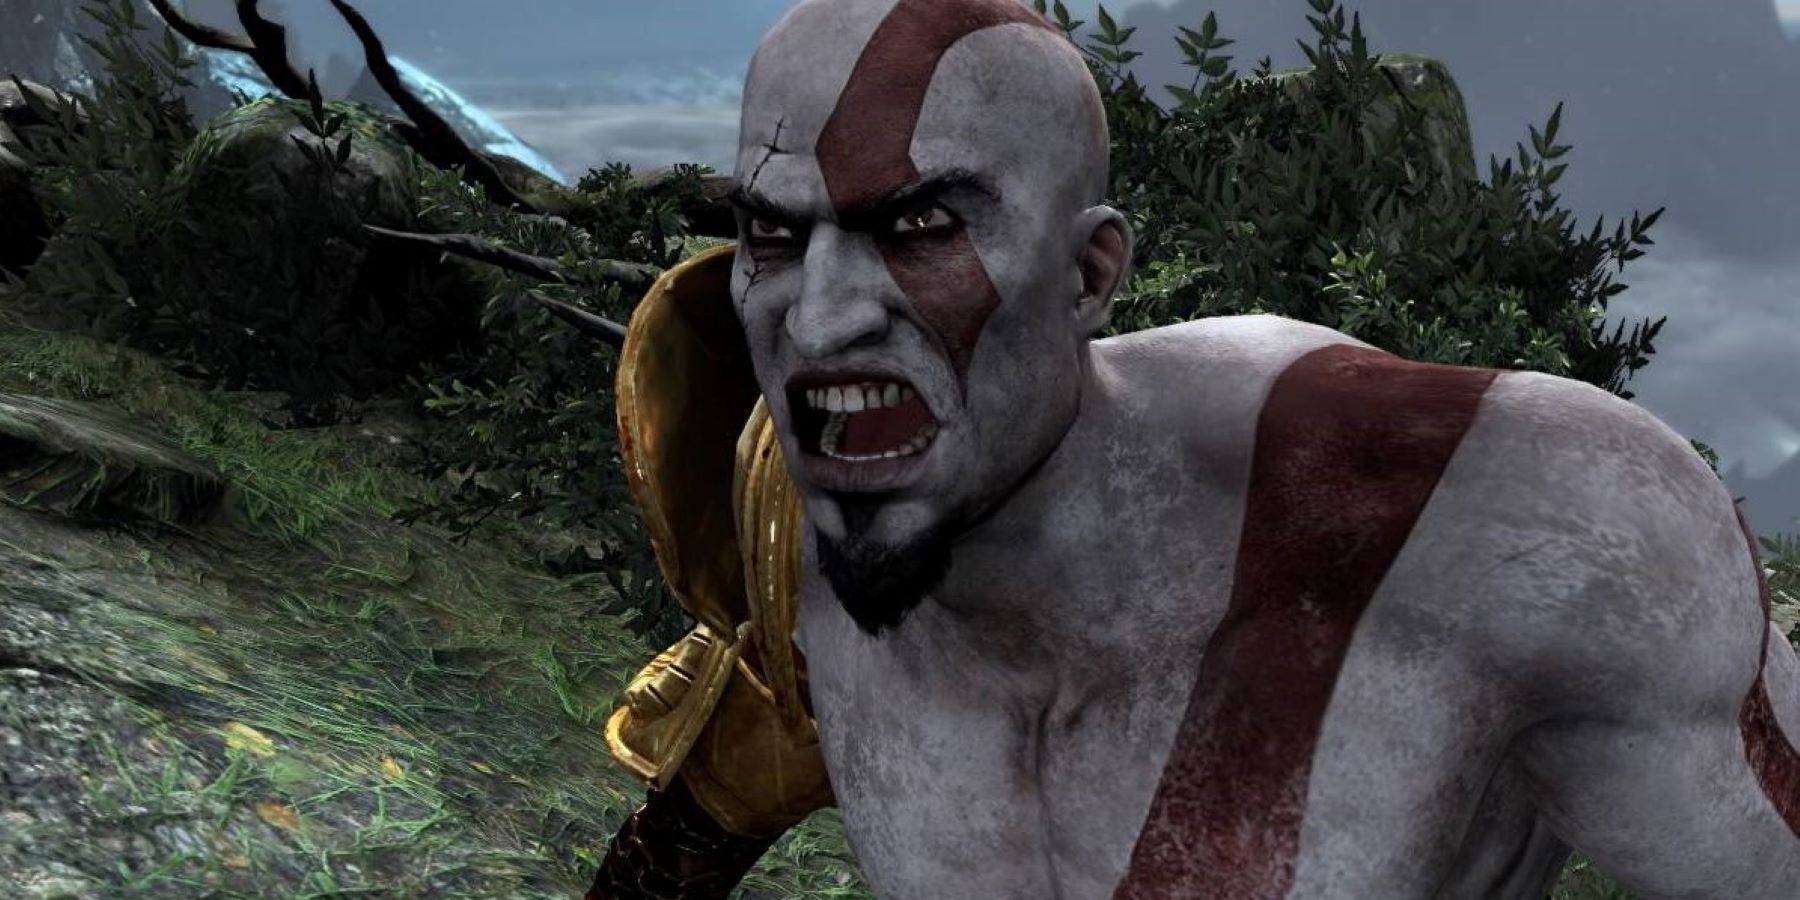 A young Kratos from an early God of War game